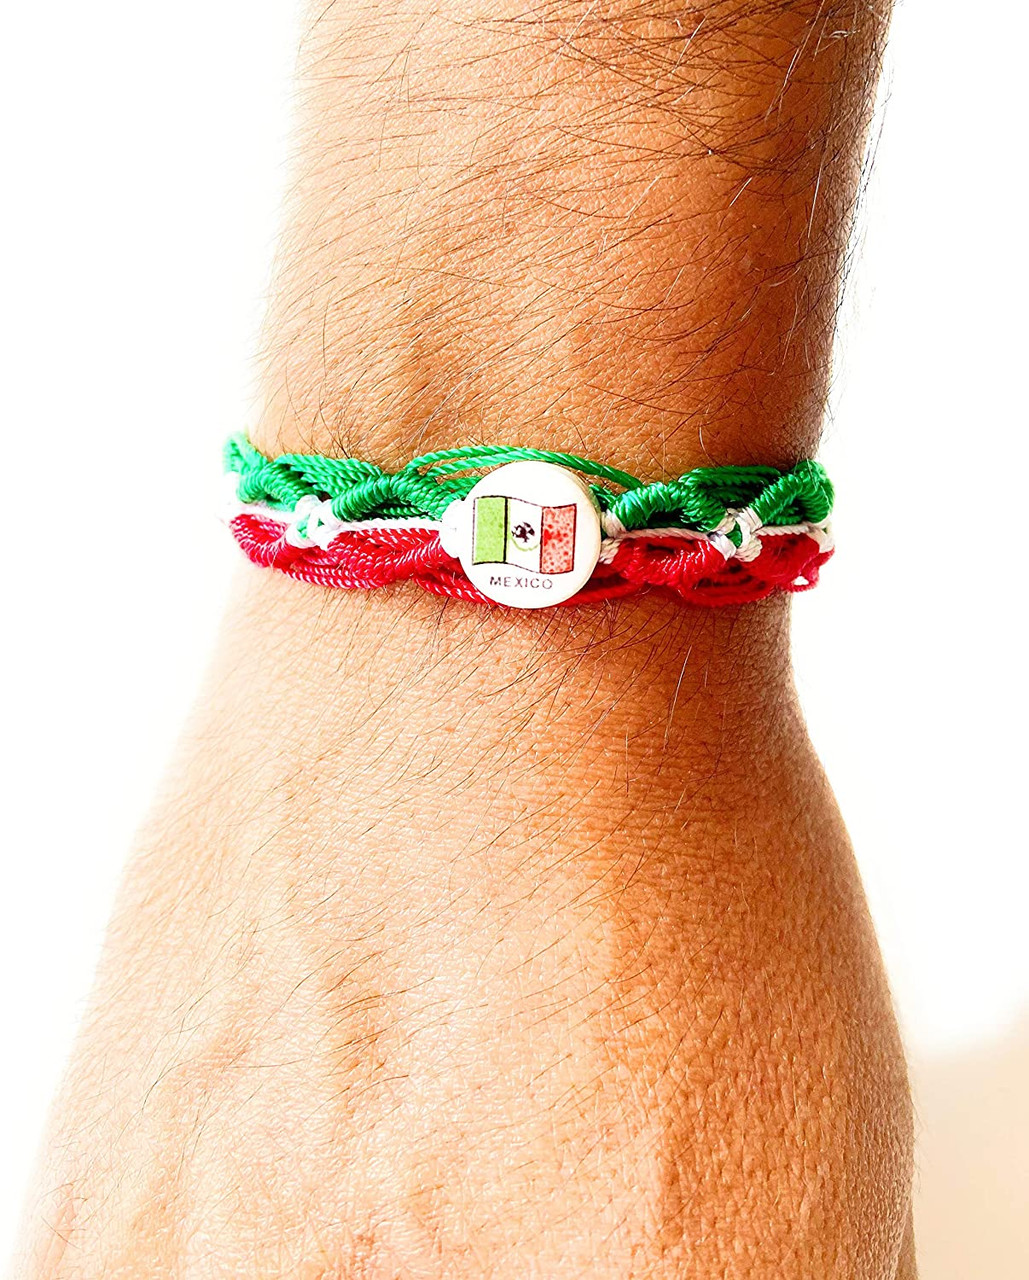 Mexican Flag Friendship Bracelet with Red White and Green Mexico Colors  Pack of 50